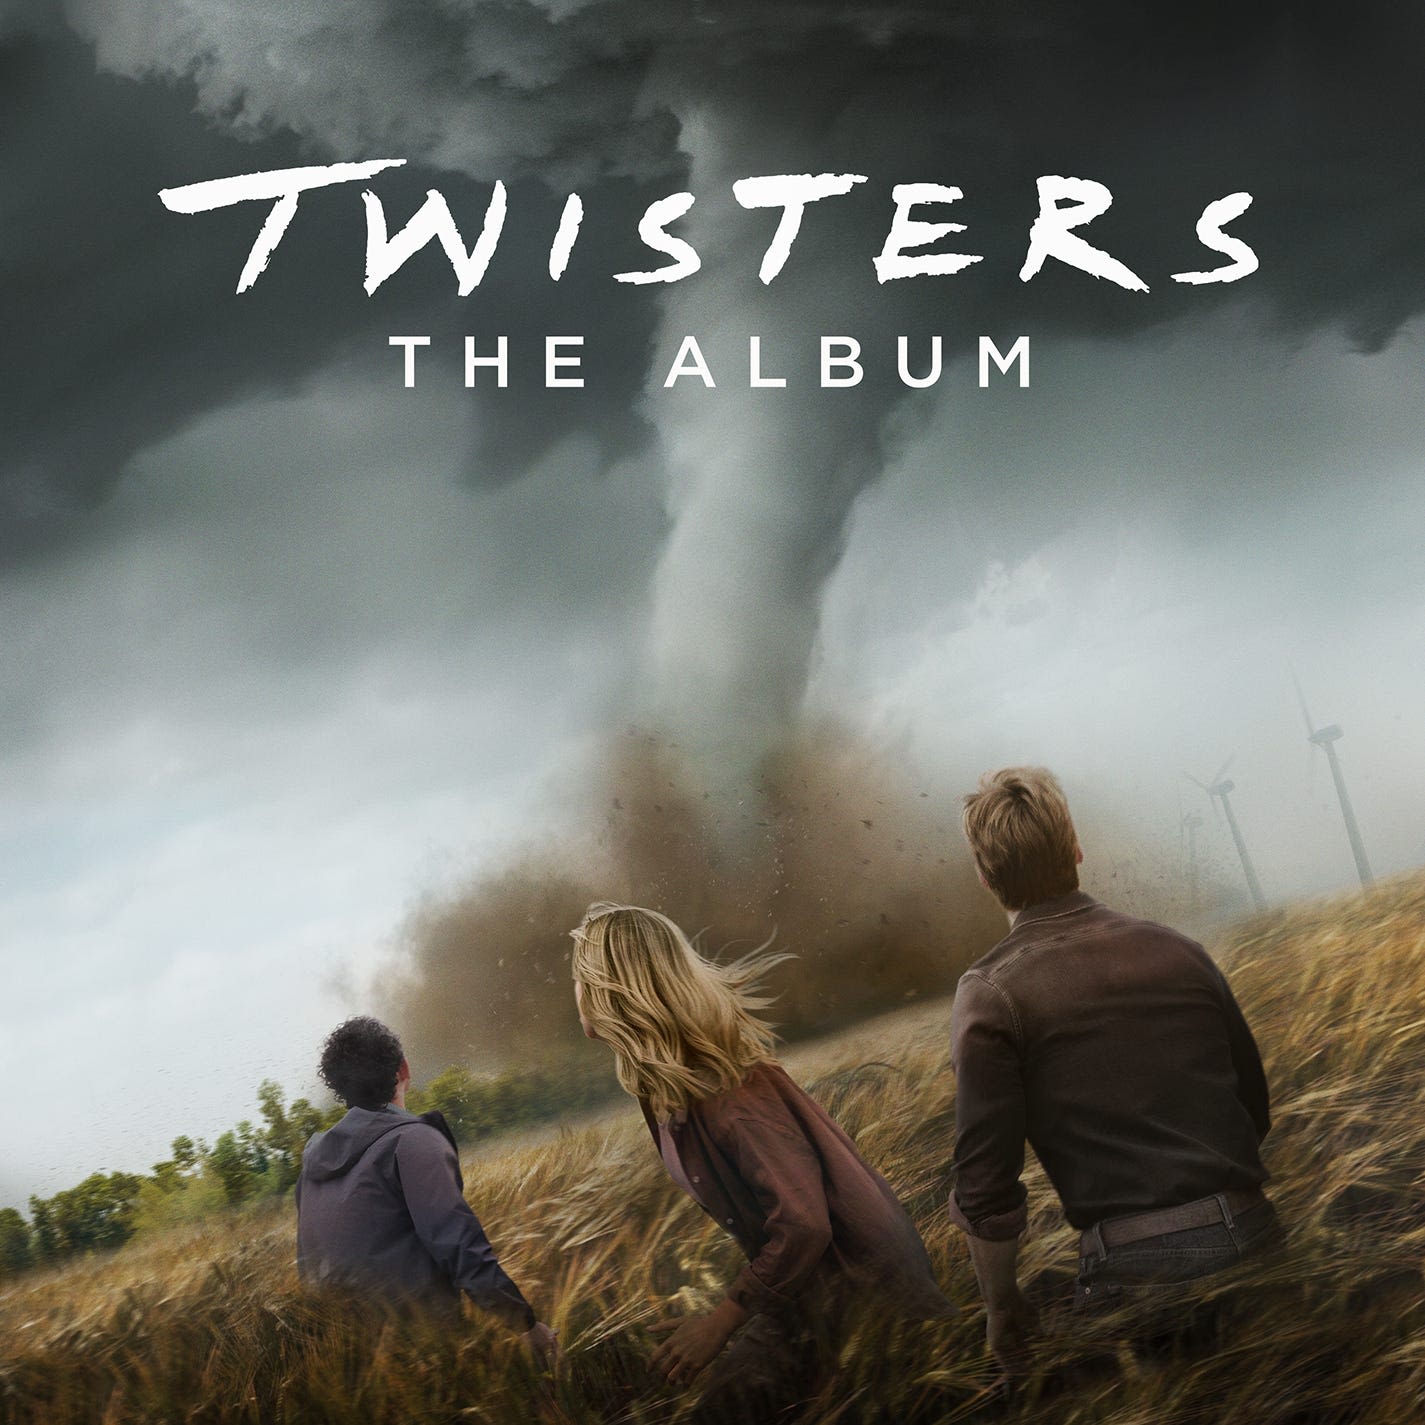 'Twisters' soundtrack highlights growing similarities between country, Americana